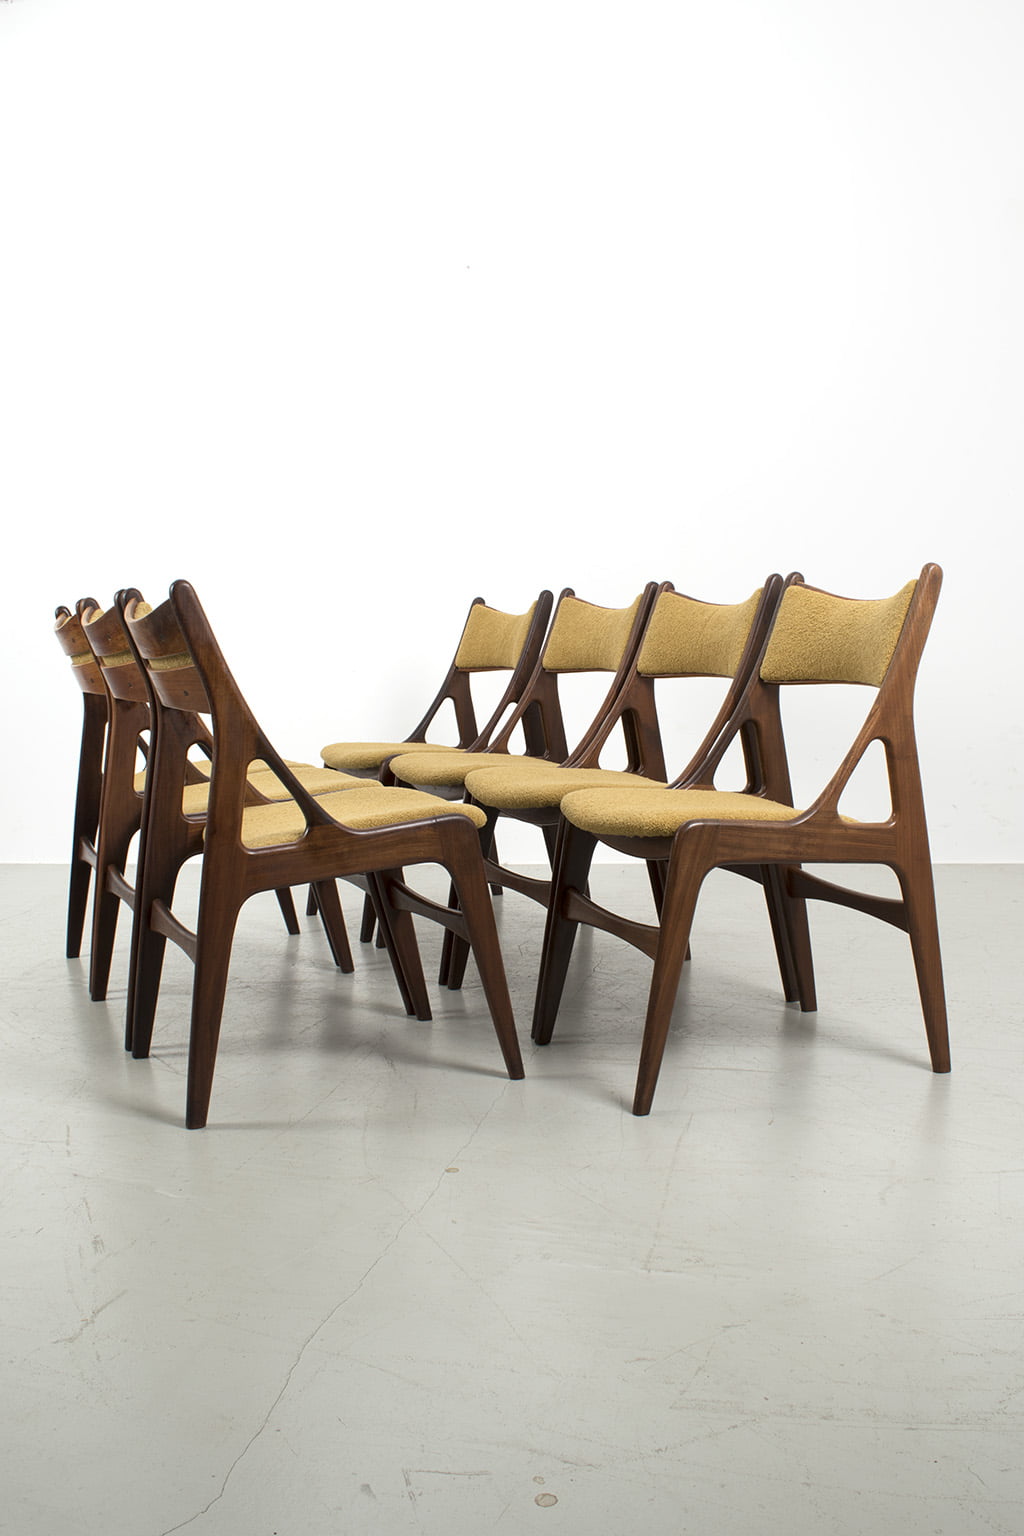 Set of 7 chairs